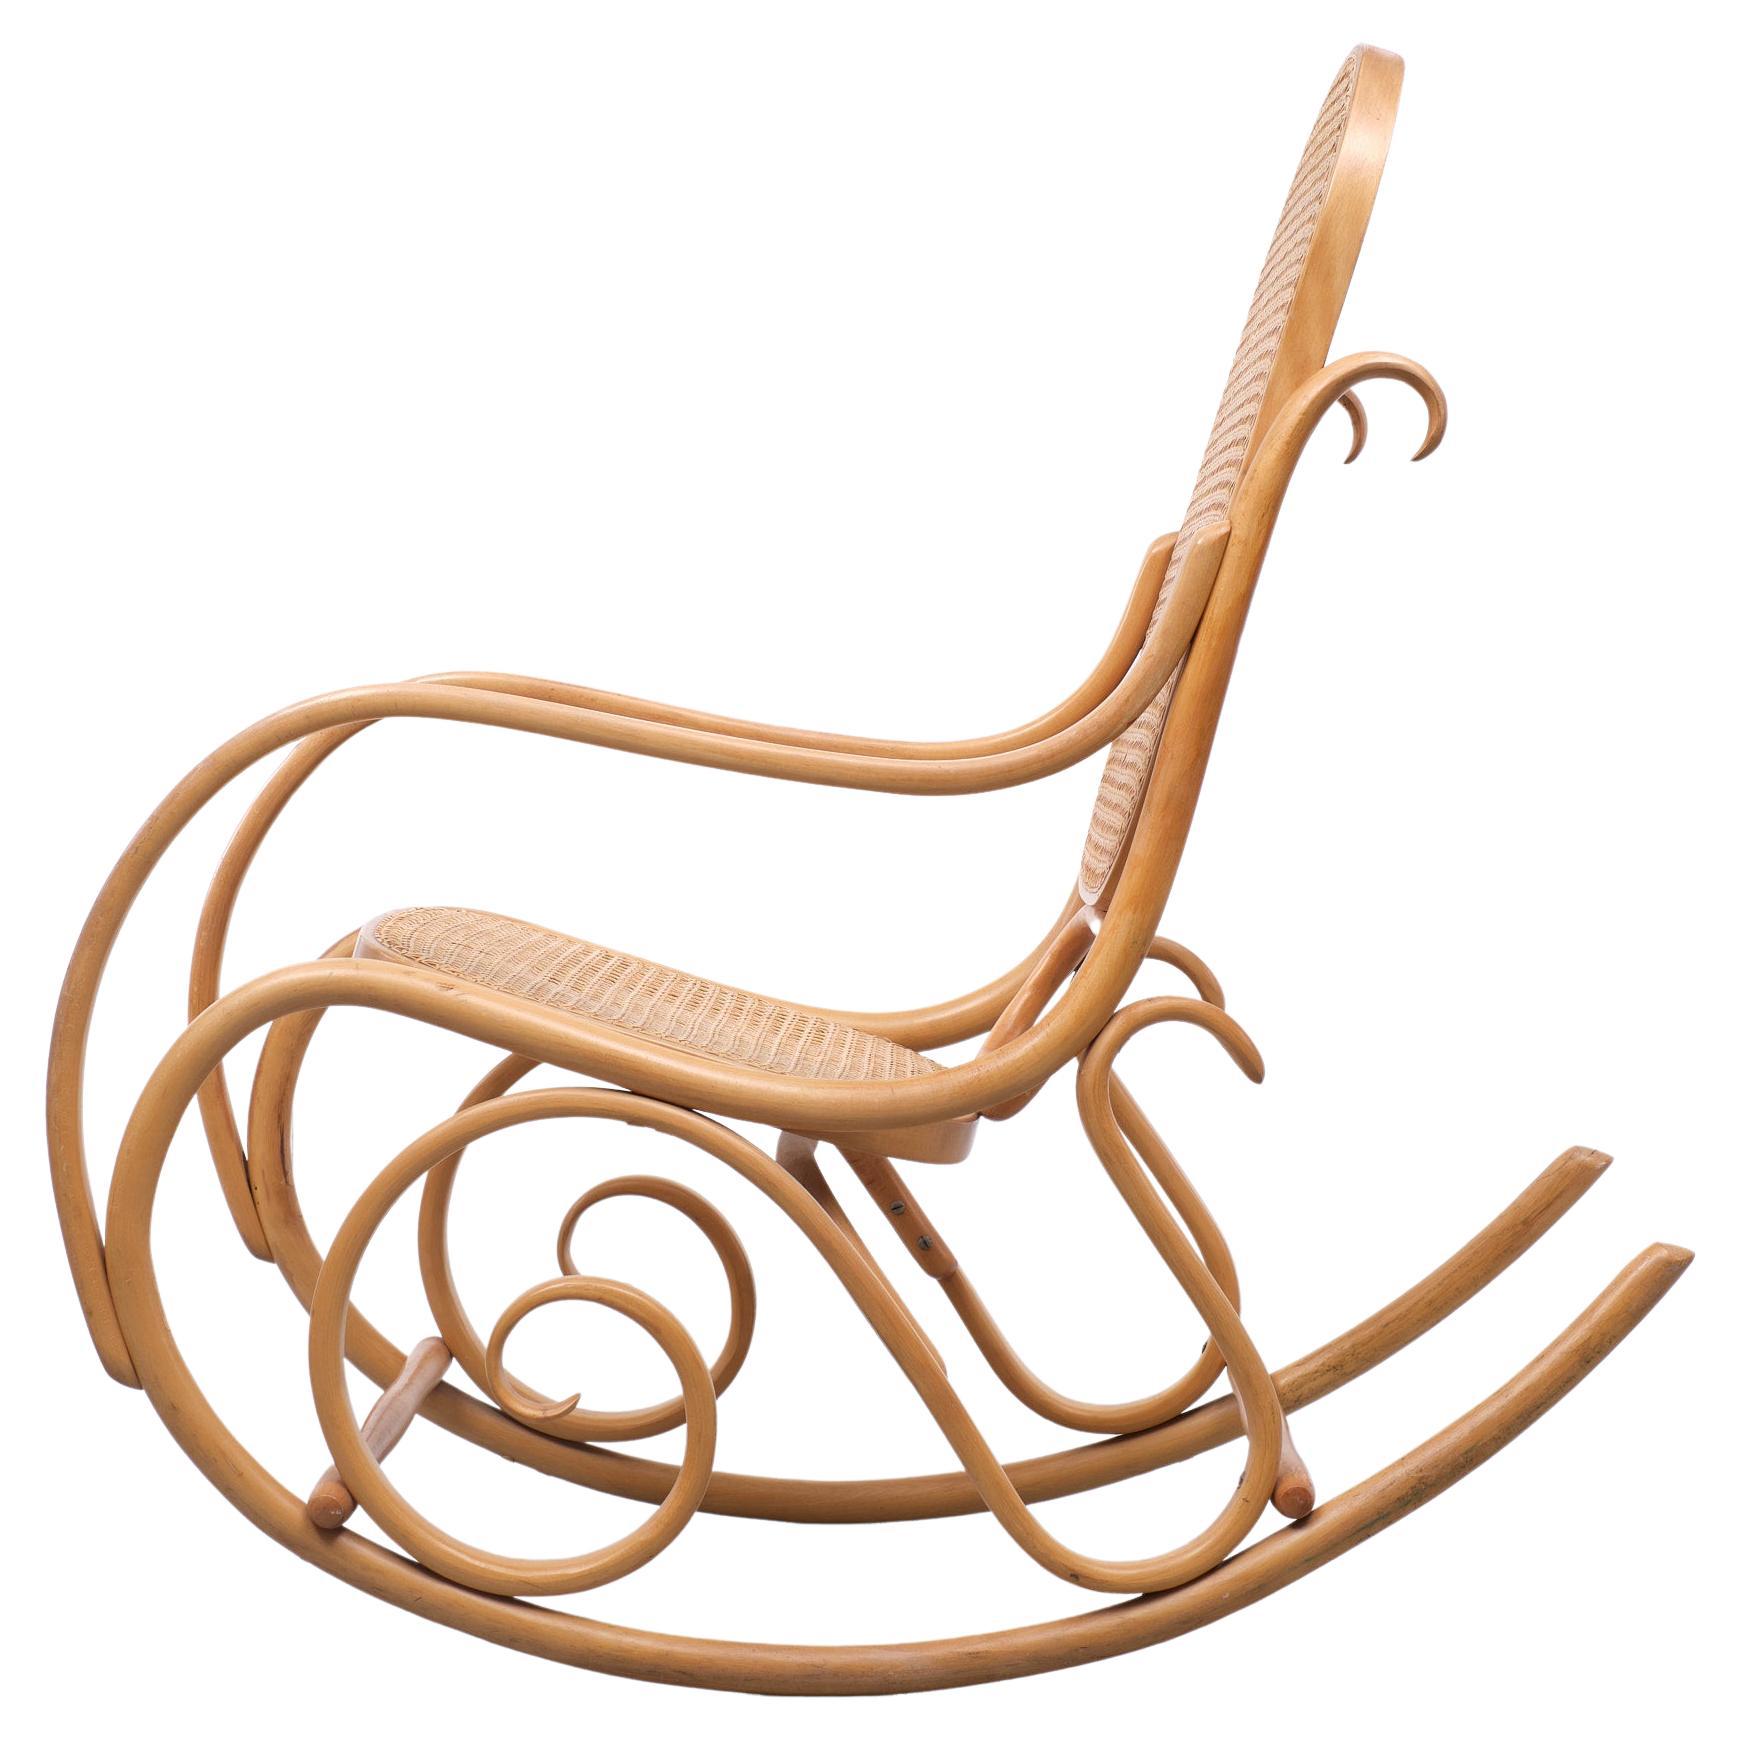 Beautiful Thonet rocking chair. Steamed Bentwood. Produced by FMG in 
Poland for Thonet classic design. Nice color. Wicker seat and backrest.
Good condition.